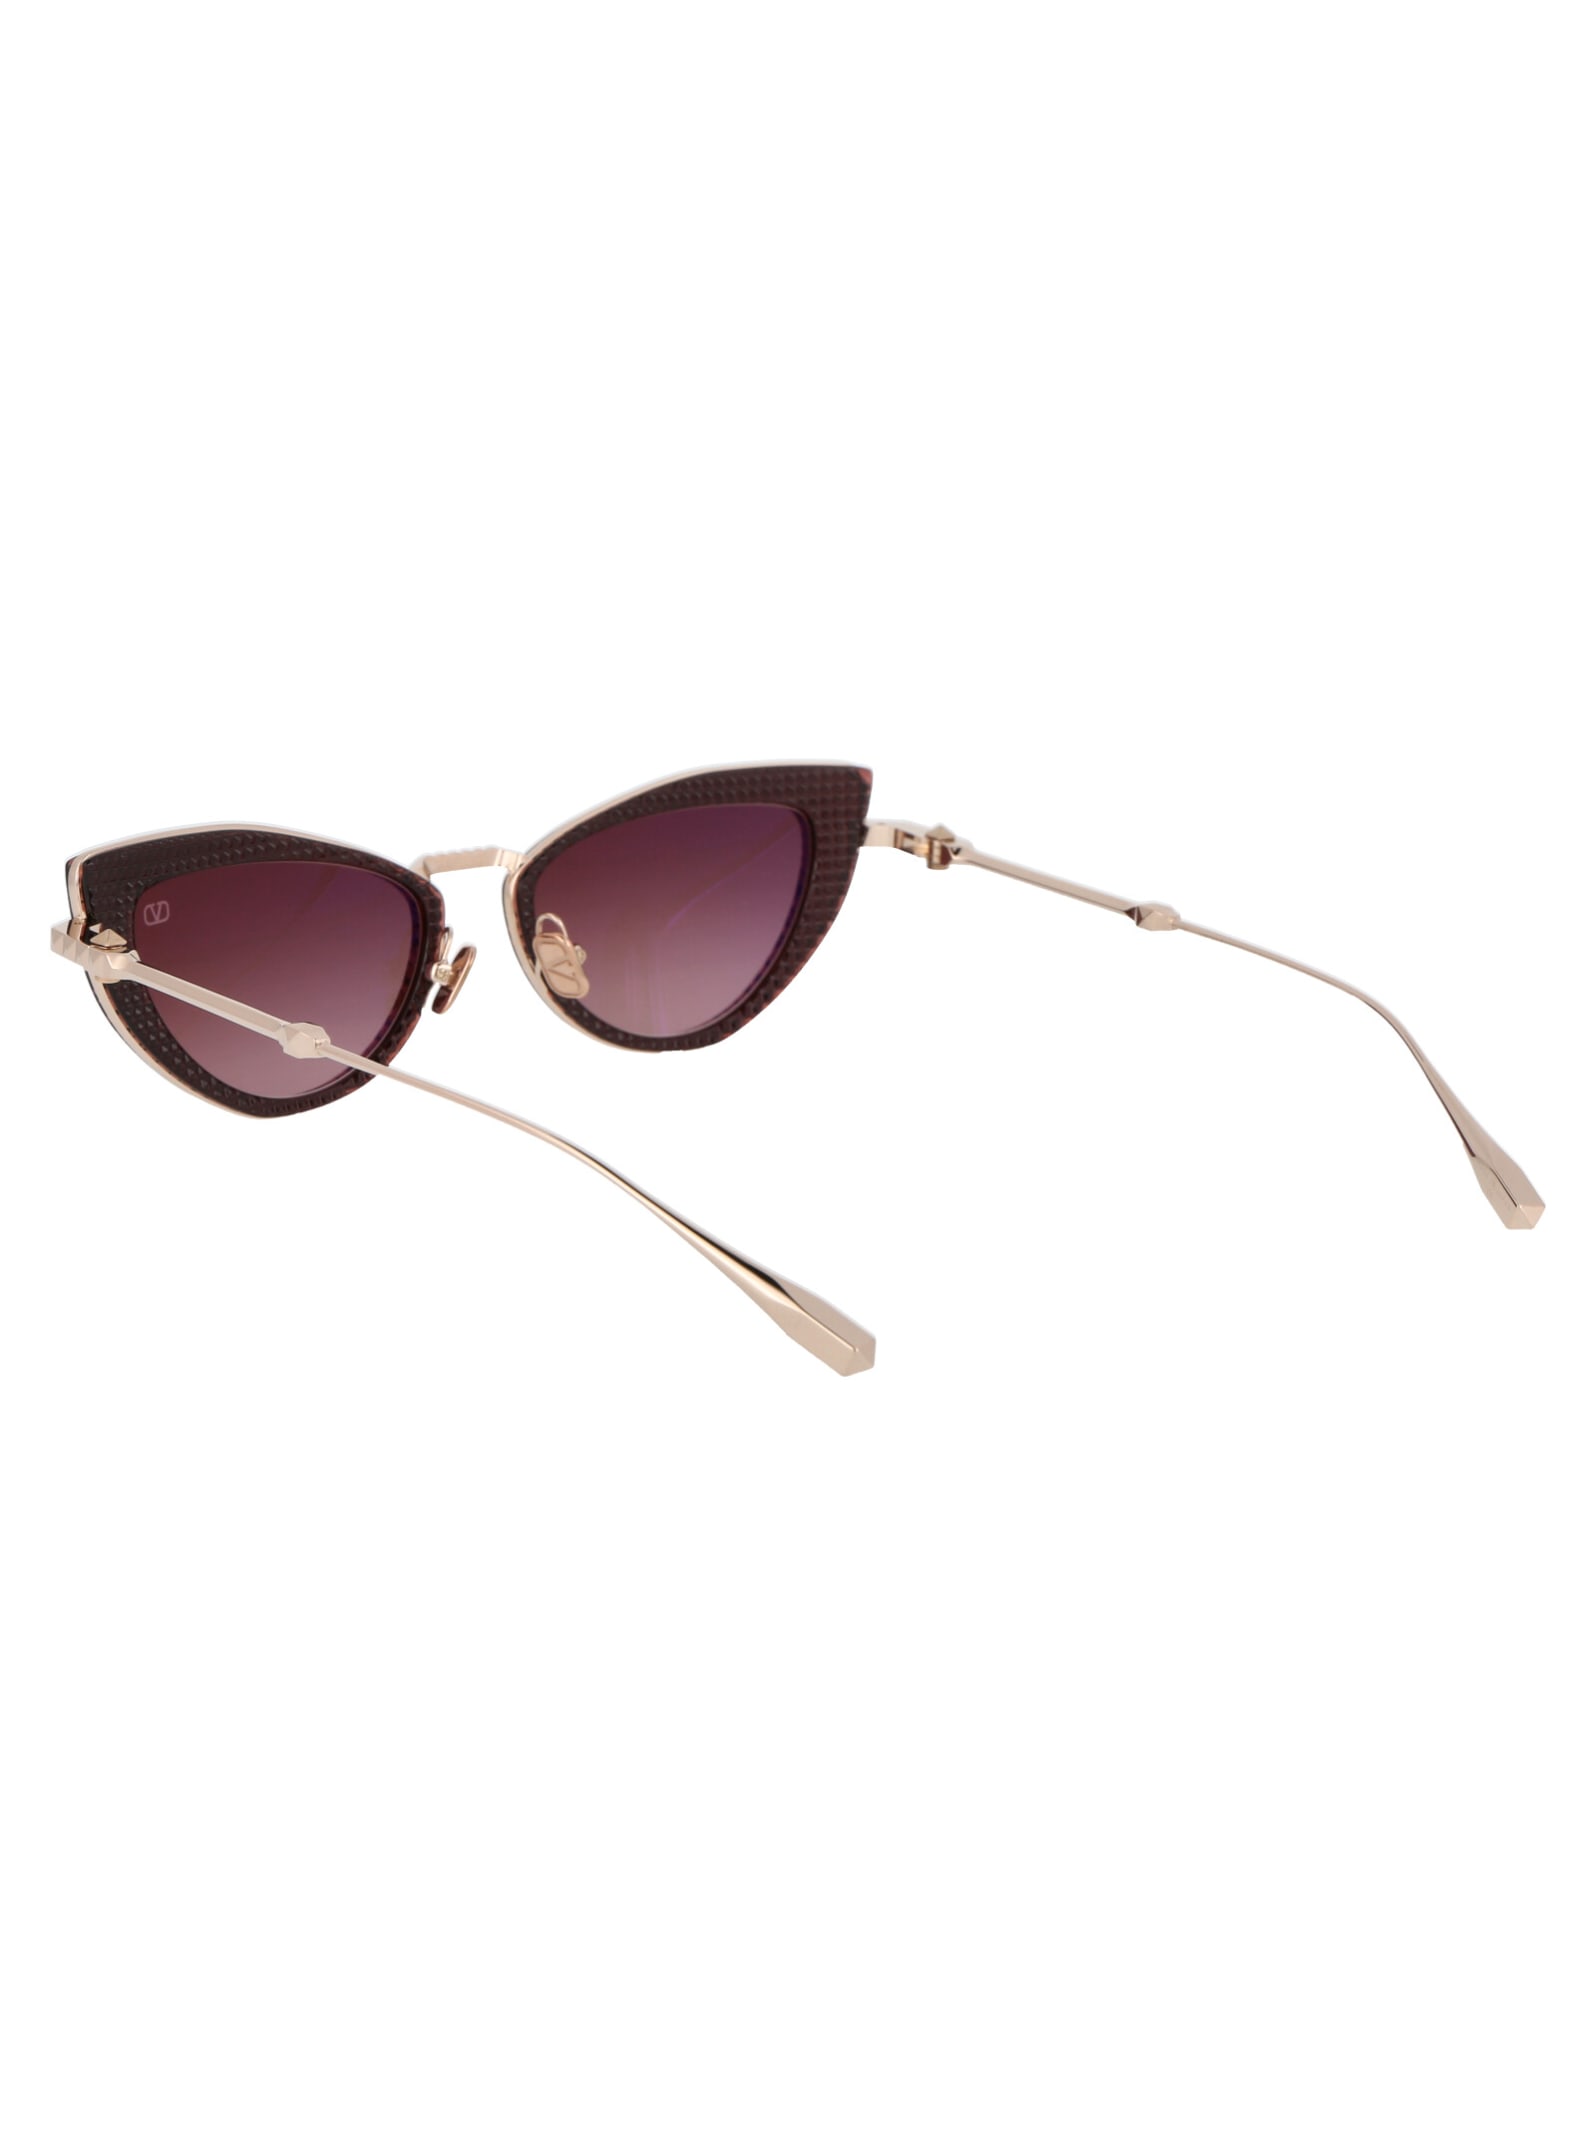 Shop Valentino Viii Sunglasses In White Gold Crystal Bordeaux W/ Dark Rose To Light Rose Gradient